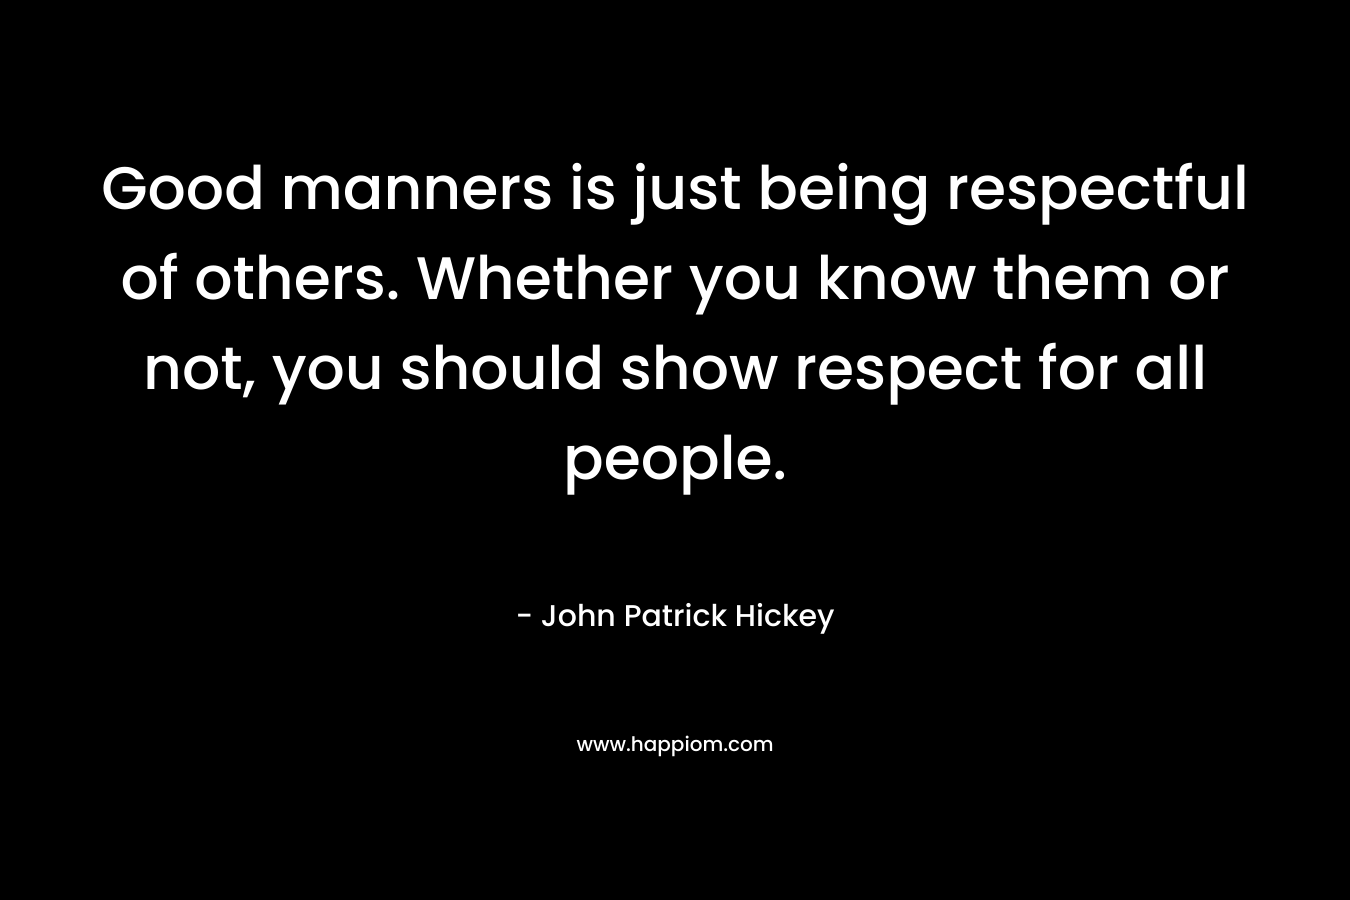 Good manners is just being respectful of others. Whether you know them or not, you should show respect for all people.